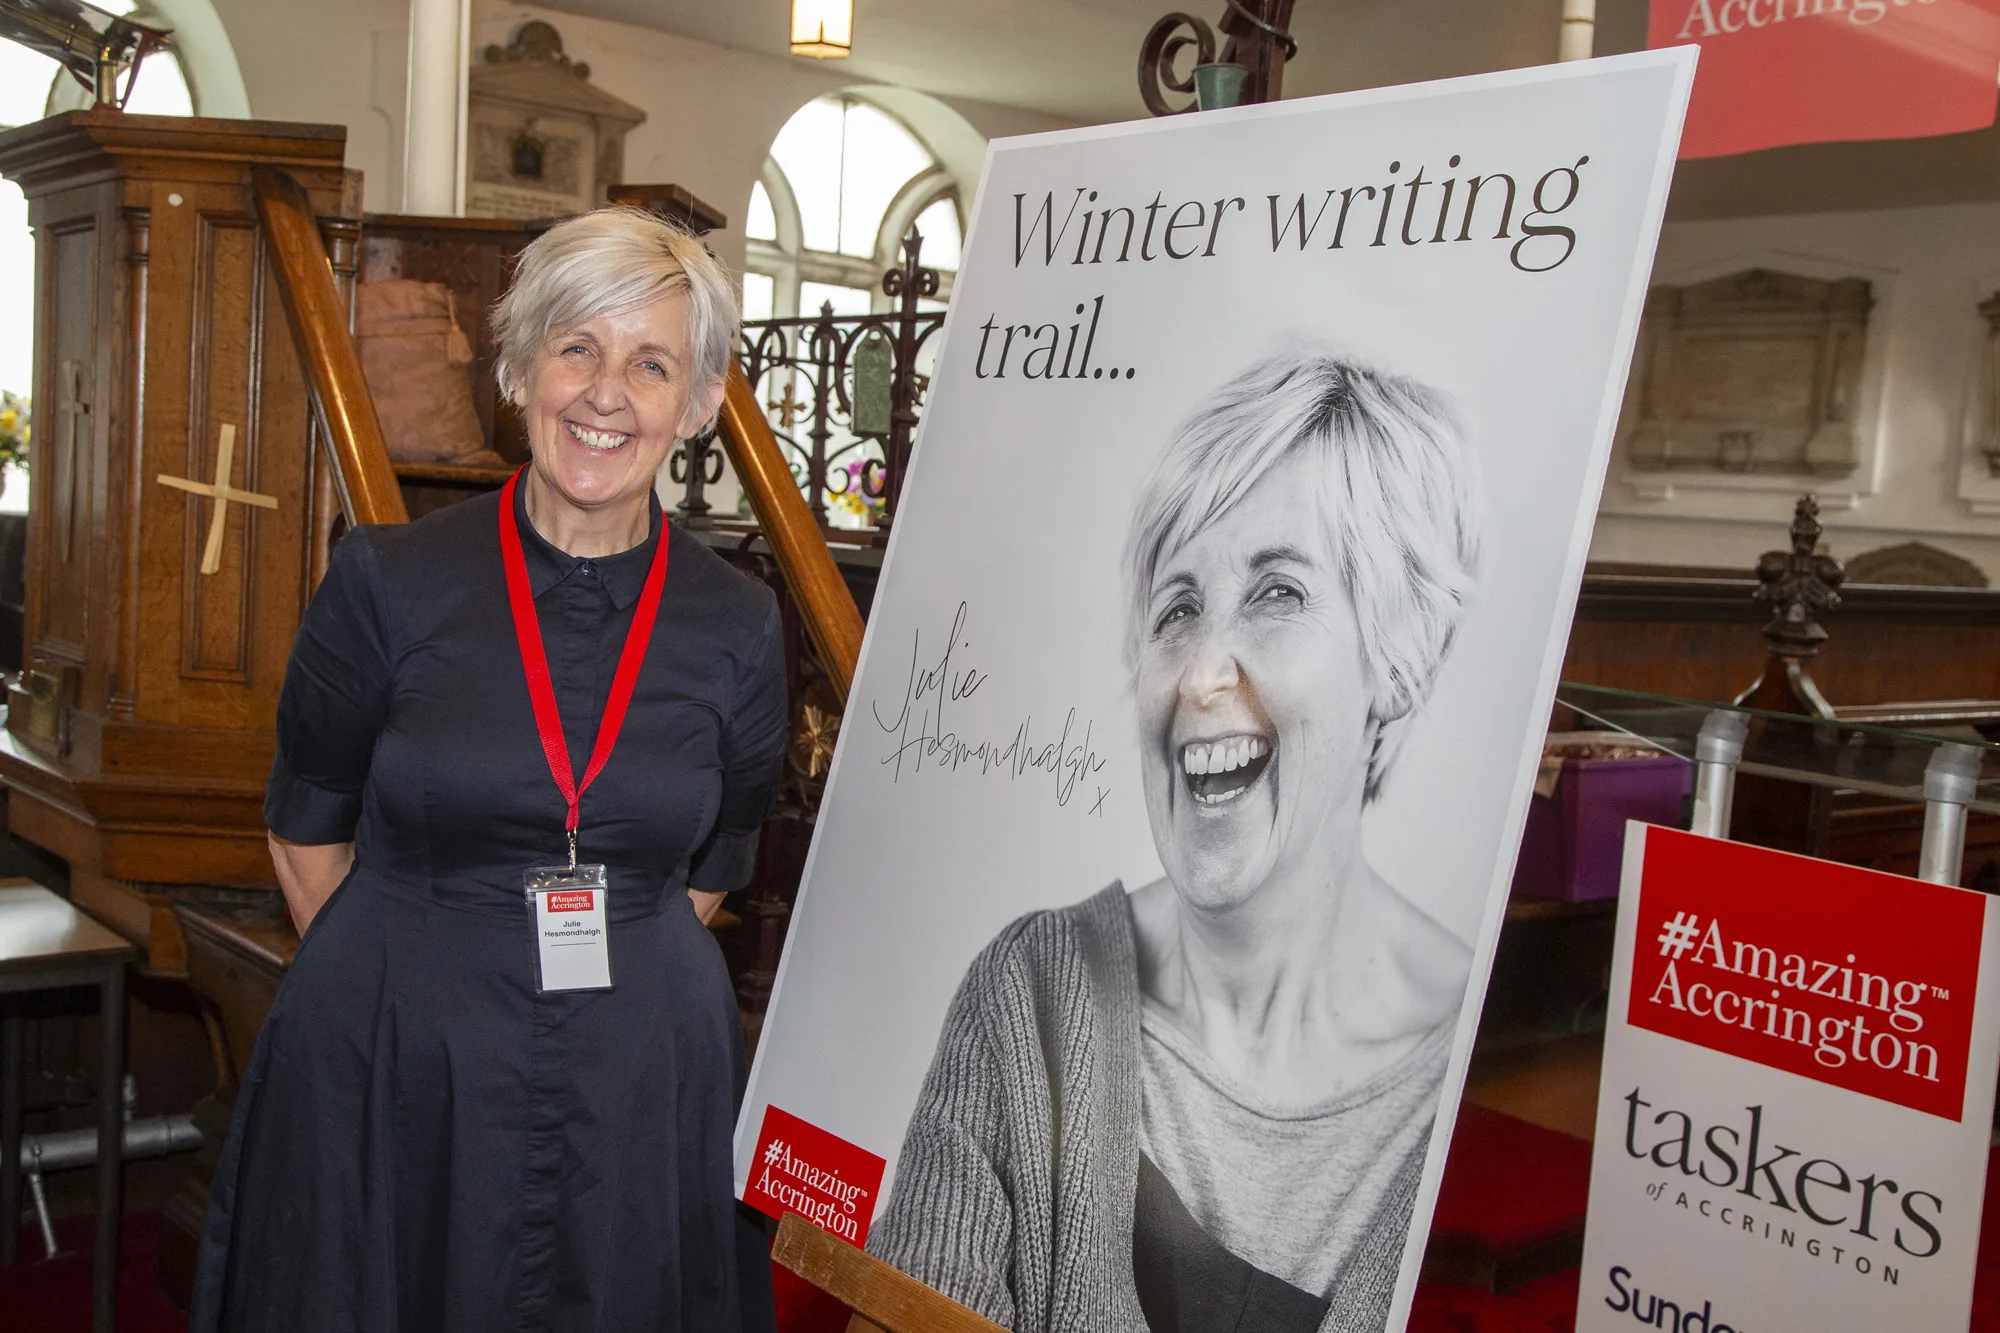 #AmazingAccrington business leaders have been asked to support an exciting new initiative led by actor Julie Hesmondhalgh.